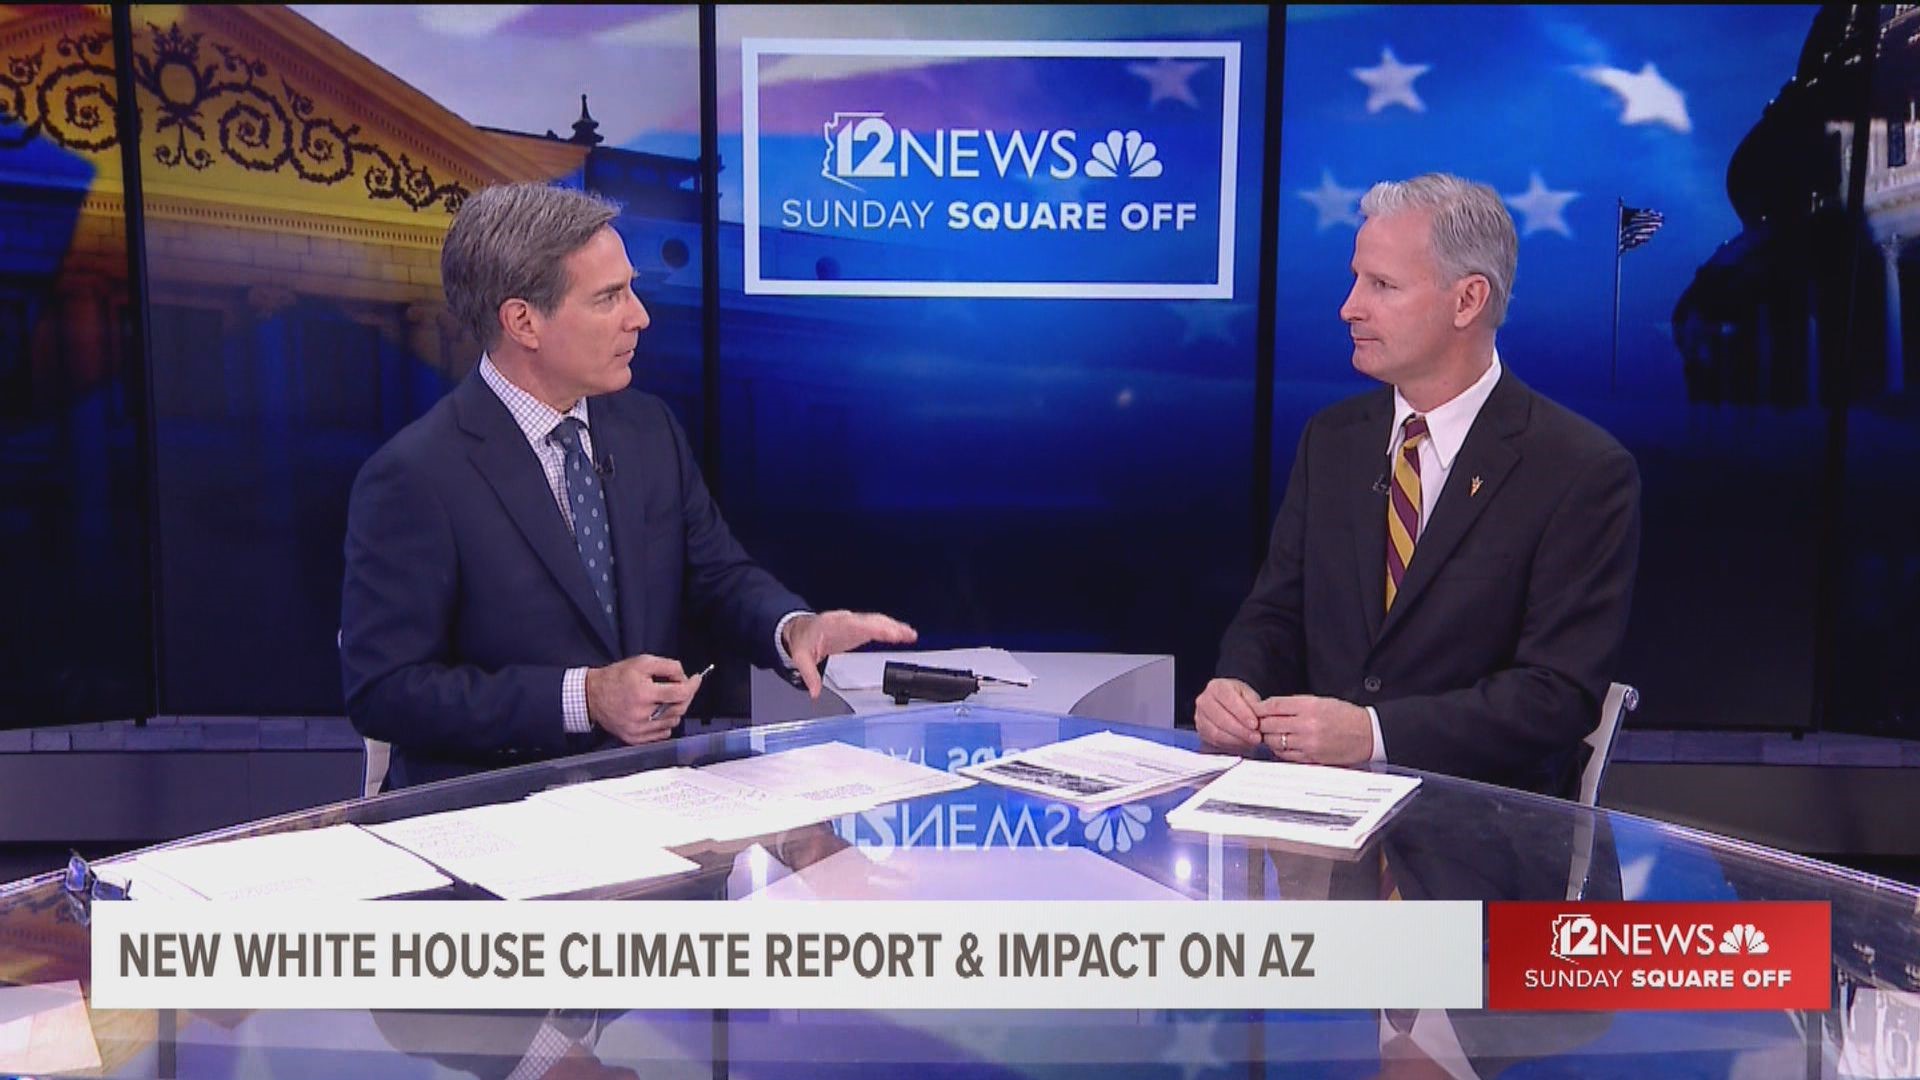 An author of the new national climate assessment explains the alarming  forecasts for Arizona and the rest of the country, and how citizens can take action.